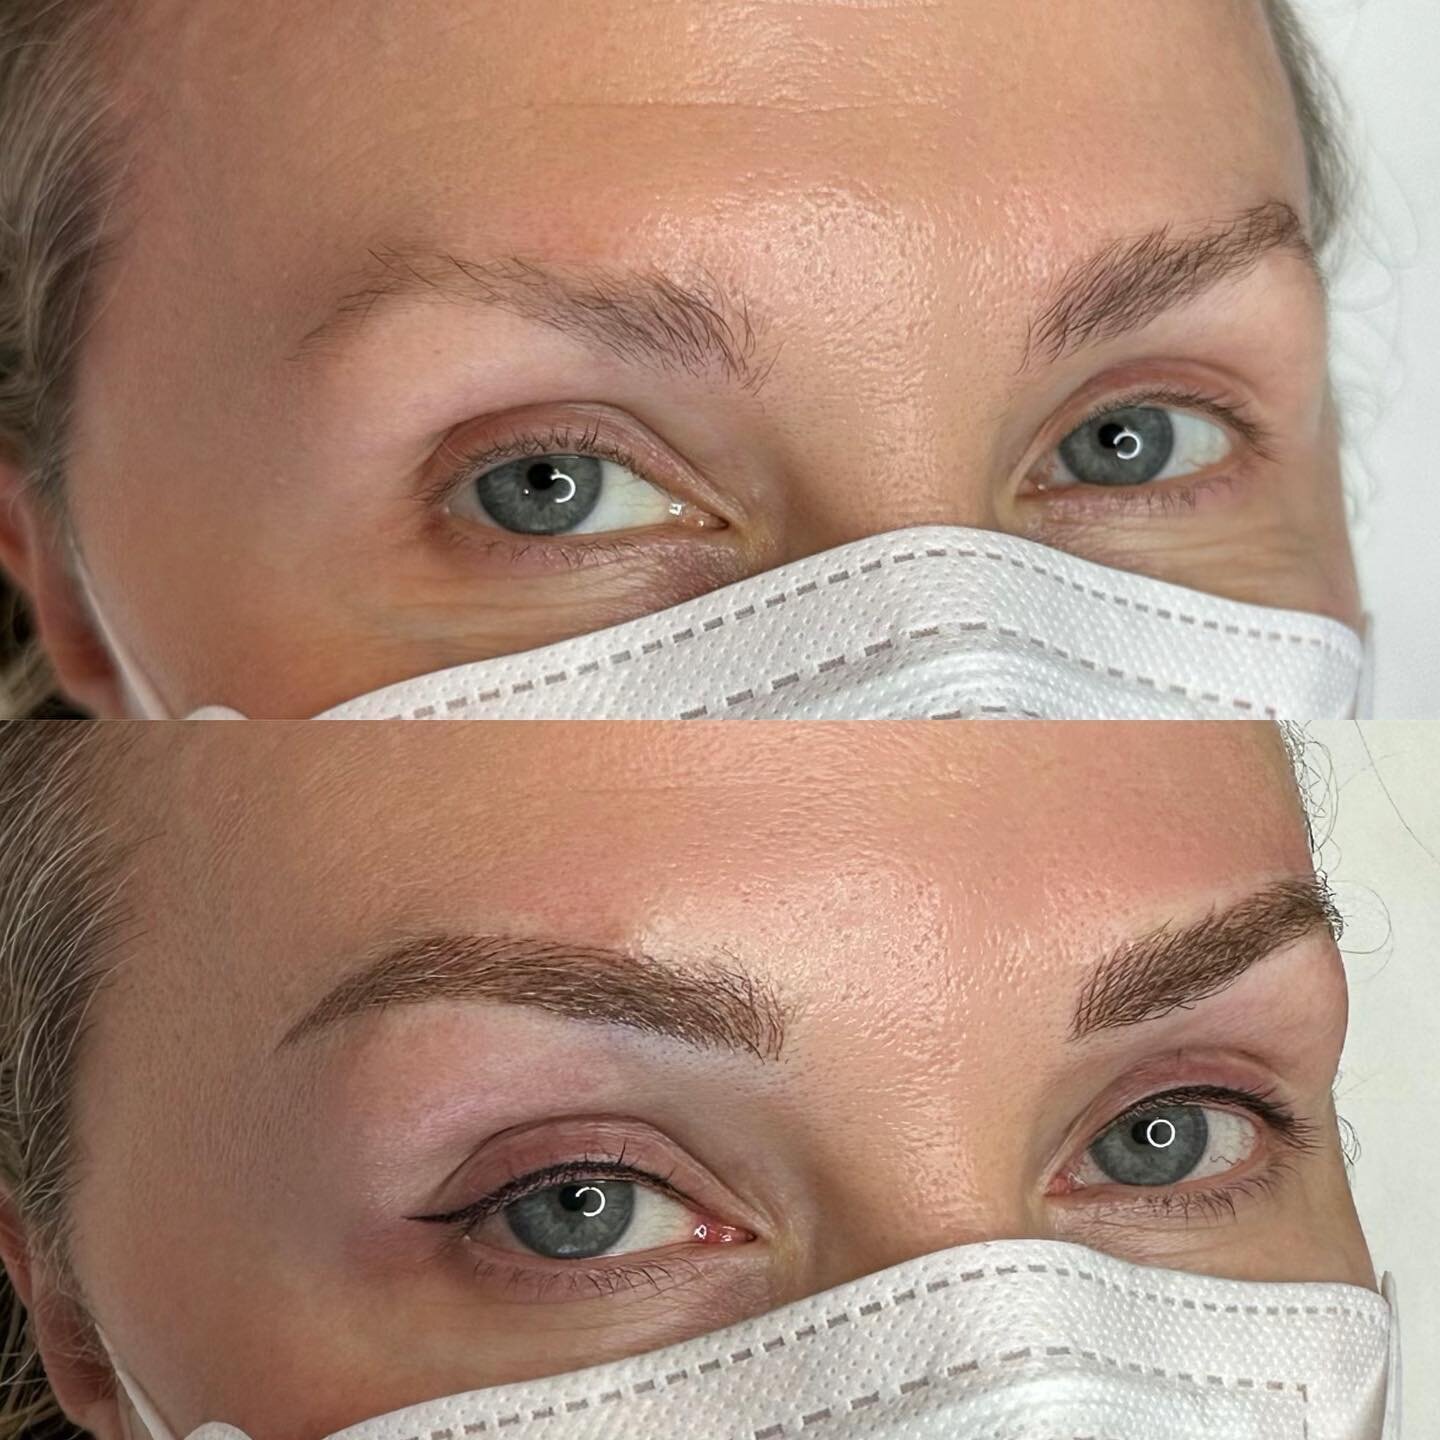 Blonde brows &amp; eyeliner tattoo before and after 🔥
&mdash;
Skin type: Dry
Technique: Nano Feather Brows
Pain level: None
Appointment time: 2 hours
Sessions: 2 required
Healing time: 7-10 days (no scabbing)
Last: 2-3 years (depends on skin type)
&